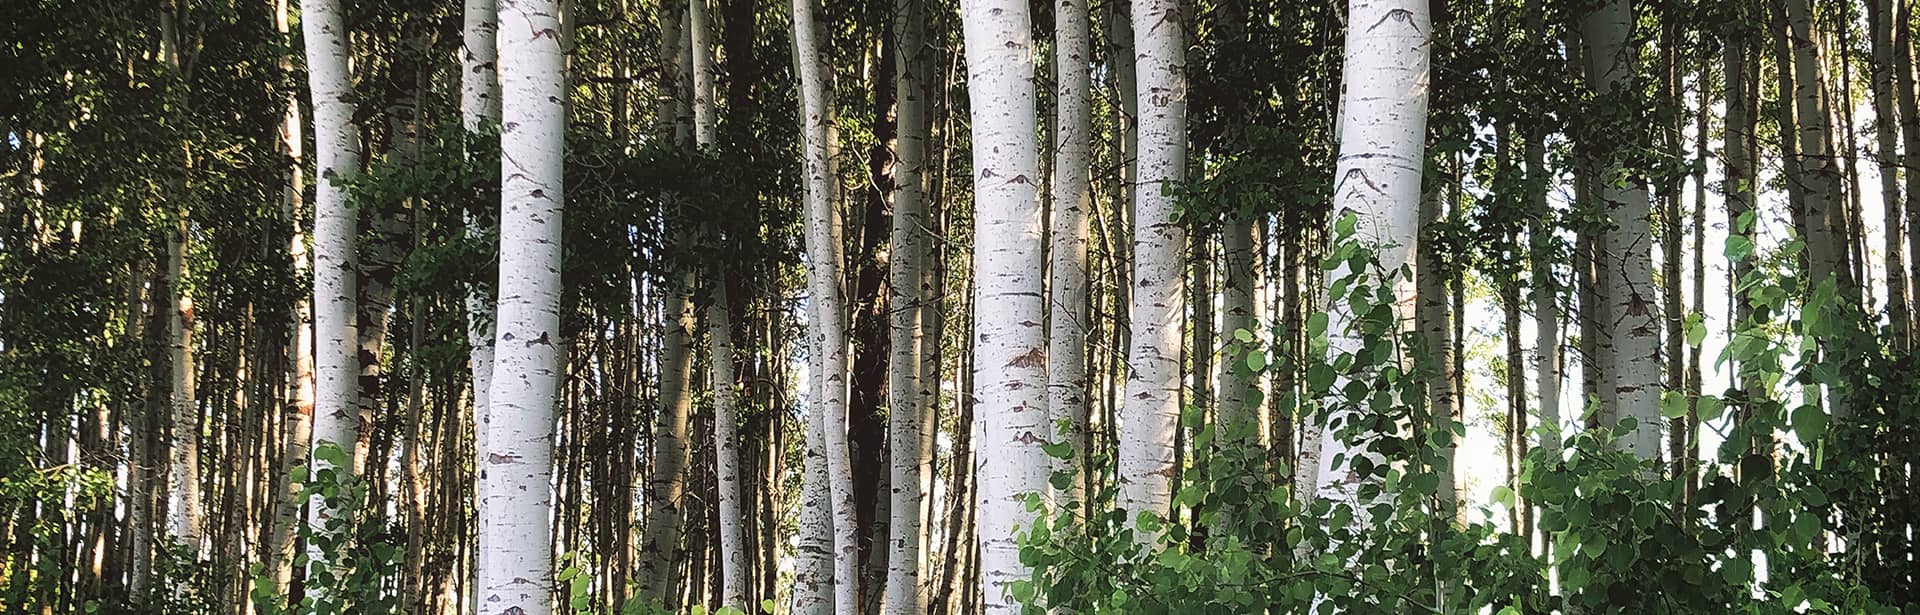 A photo of a forest of birch trees